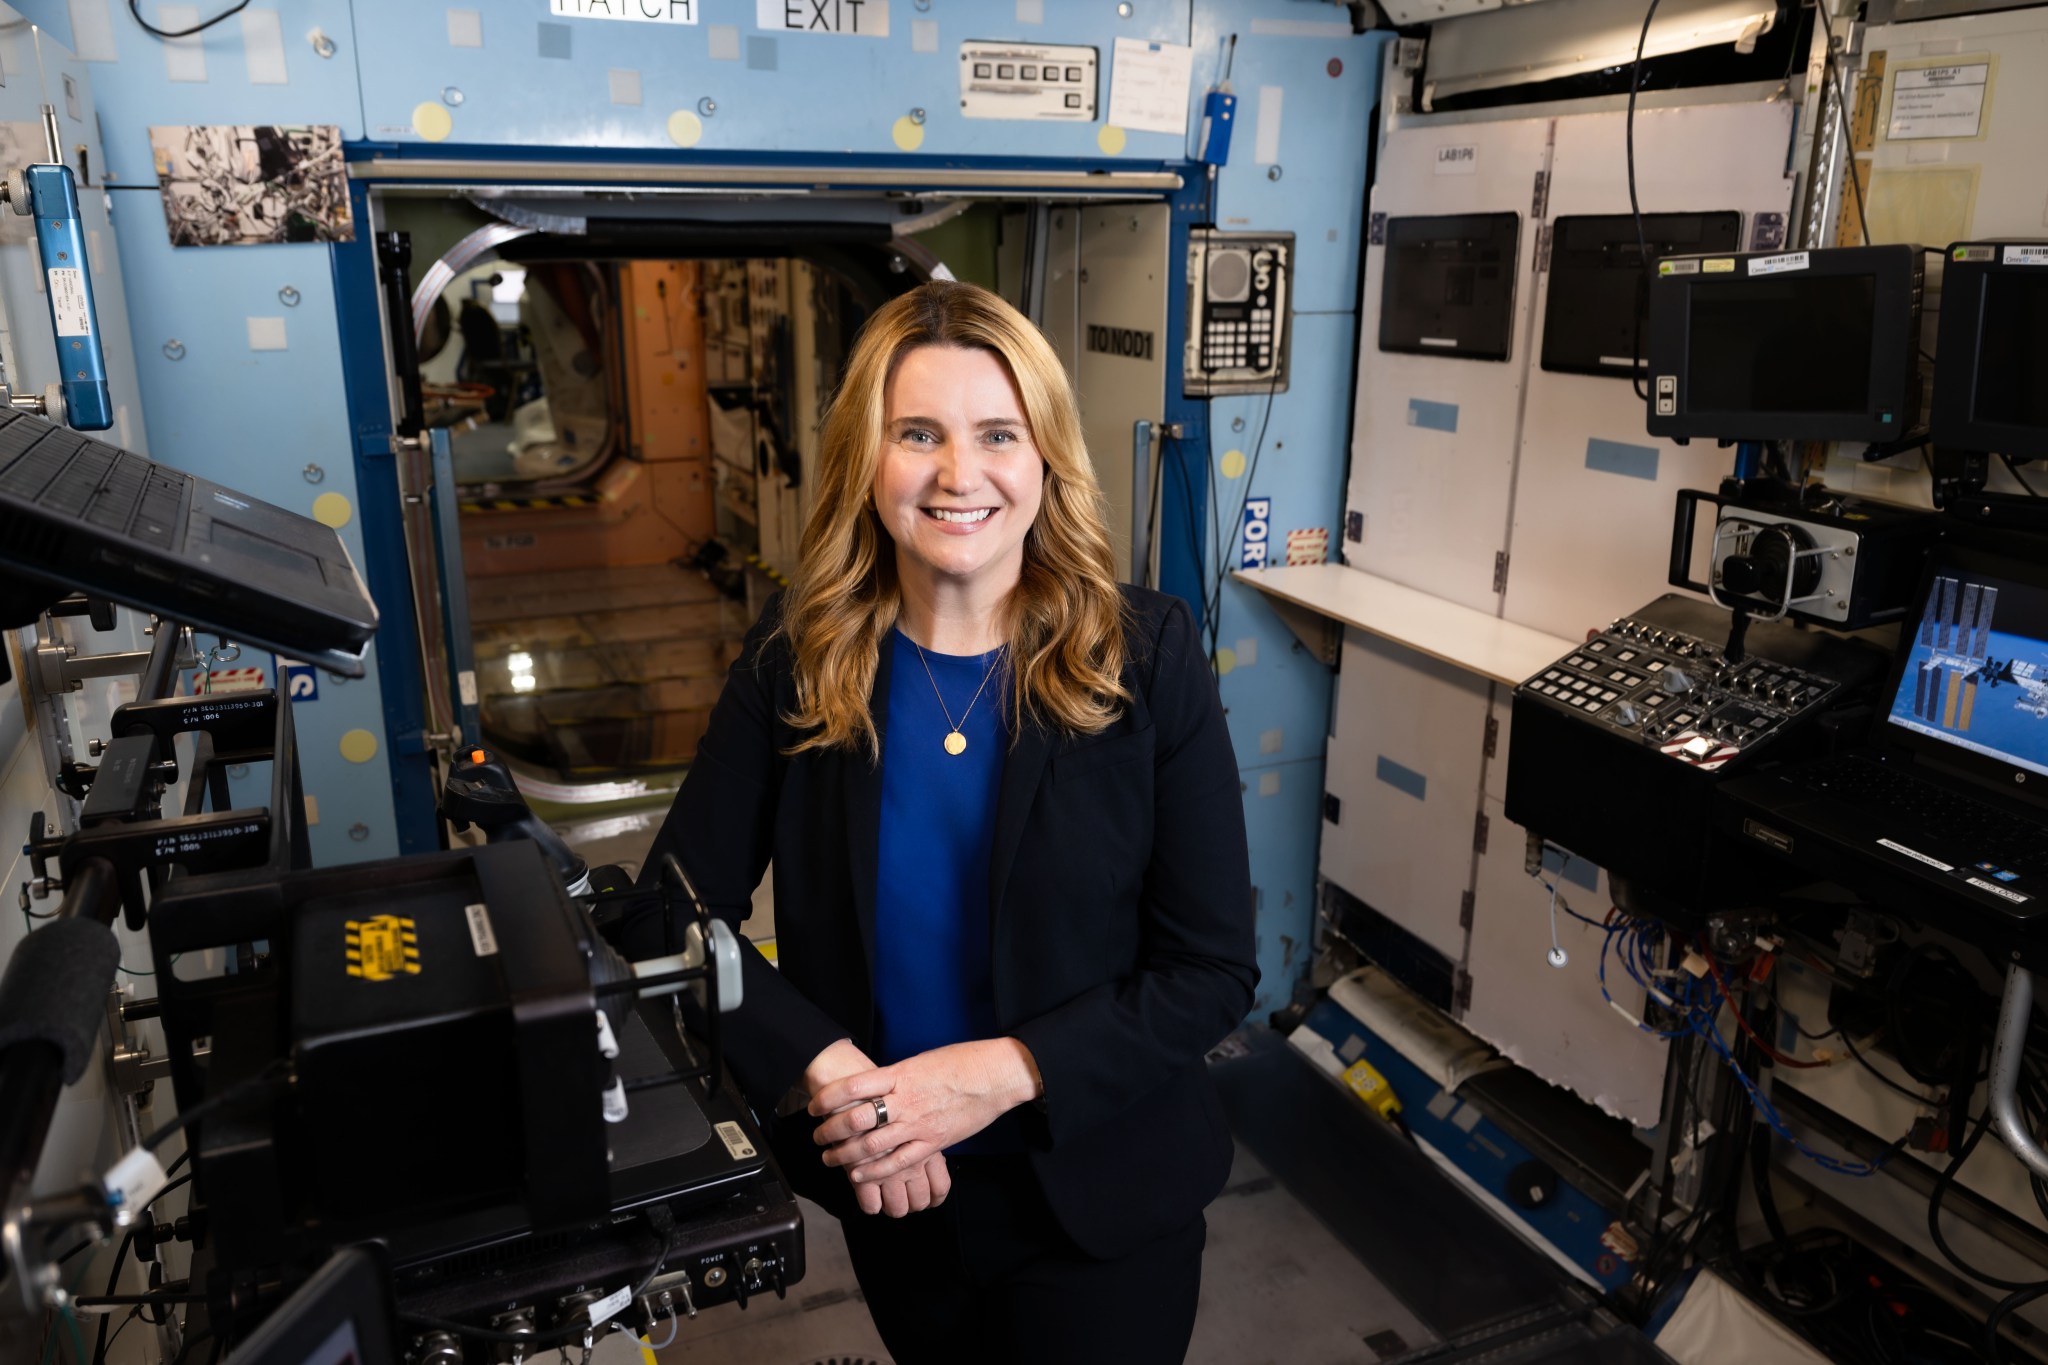 A woman with wavy blonde hair slightly past her shoulders smiles at the camera with one hand over the other as she leans against equipment inside one of the International Space Station modules inside the Space Vehicle Mockup Facility at NASA’s Johnson Space Center. She is wearing black dress pants, a blue blouse, and a black jacket, and a circular pendant is visible around her neck. Black computer equipment and white cabinets are seen against the left and right walls of the module, and a large rounded square opening to other modules is present behind Jennifer. The wall surrounding the opening is light blue, and there are many items and labels affixed to it. Blue handrails are present on both sides of the opening, as well as on one of the walls.